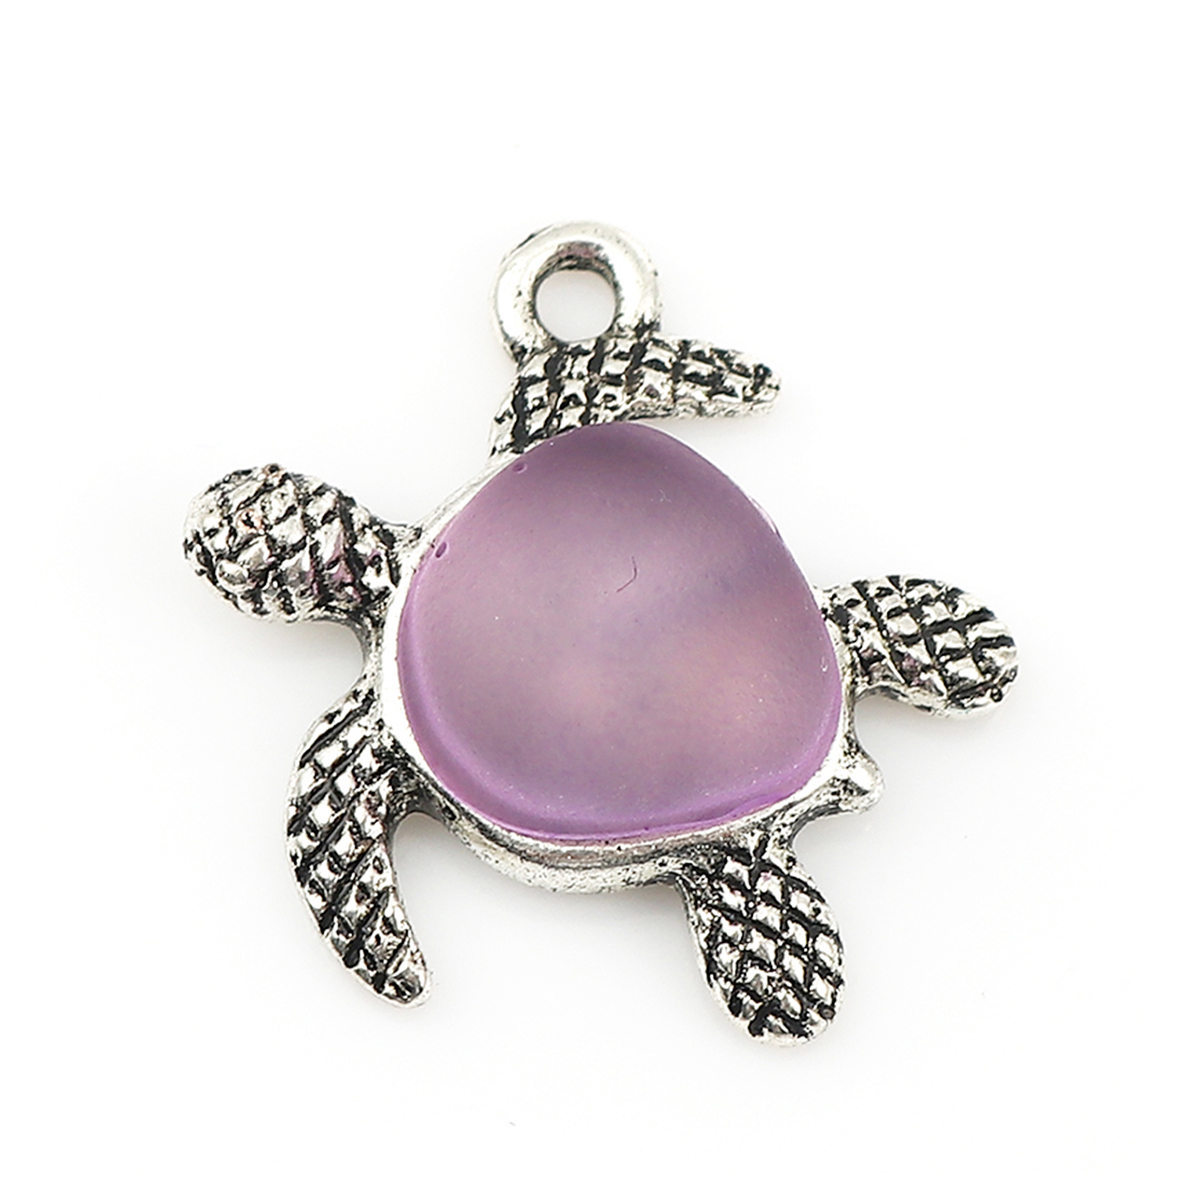 Picture of Zinc Based Alloy & Resin Ocean Jewelry Charms Sea Turtle Animal Antique Silver Purple 20mm( 6/8") x 19mm( 6/8"), 5 PCs